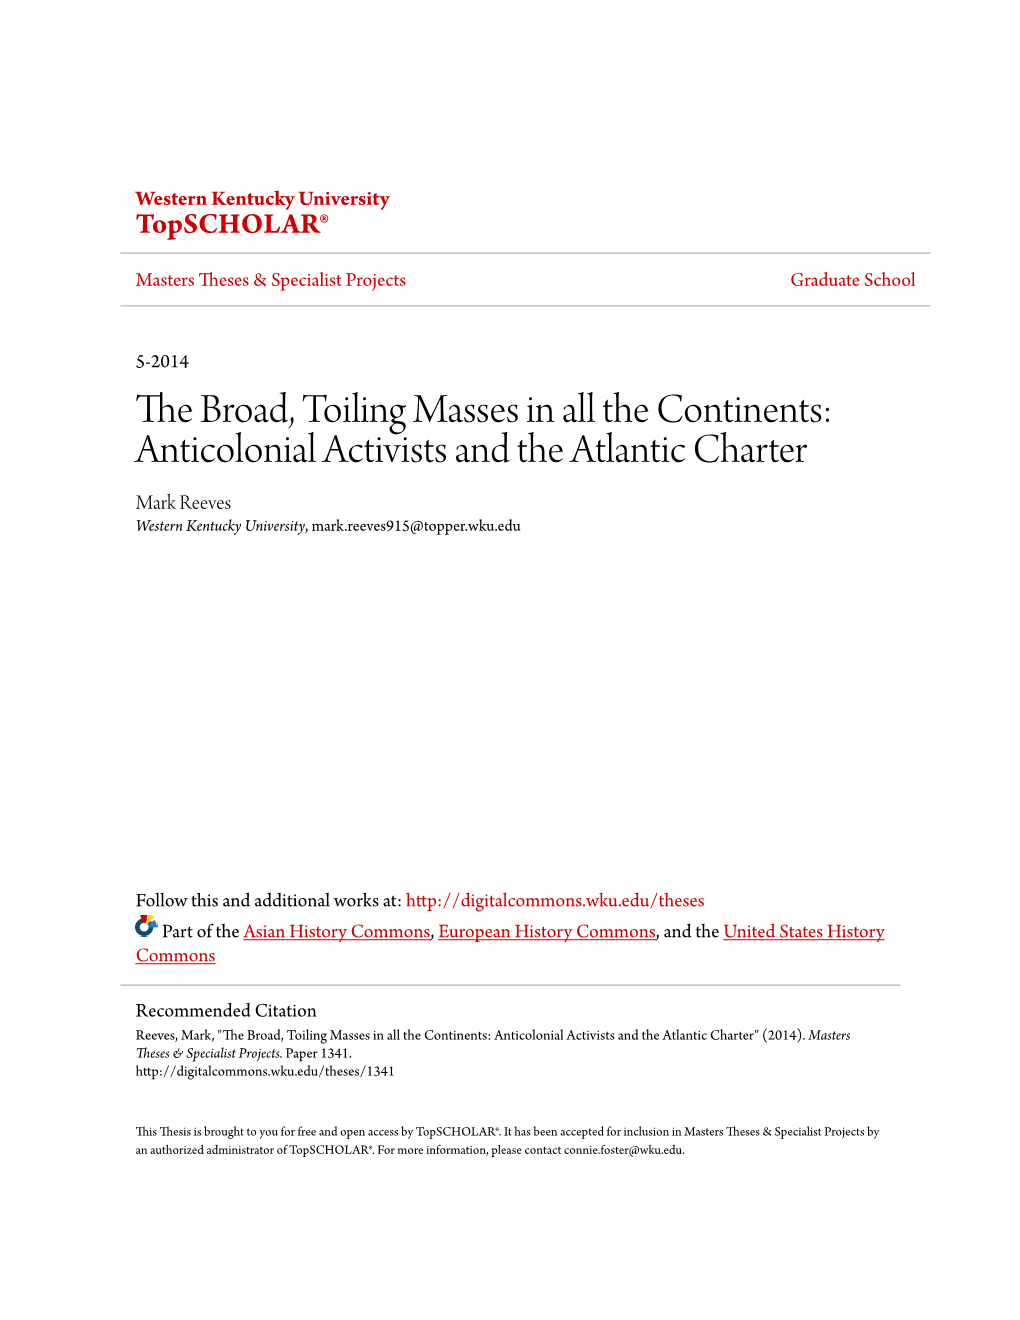 Anticolonial Activists and the Atlantic Charter Mark Reeves Western Kentucky University, Mark.Reeves915@Topper.Wku.Edu